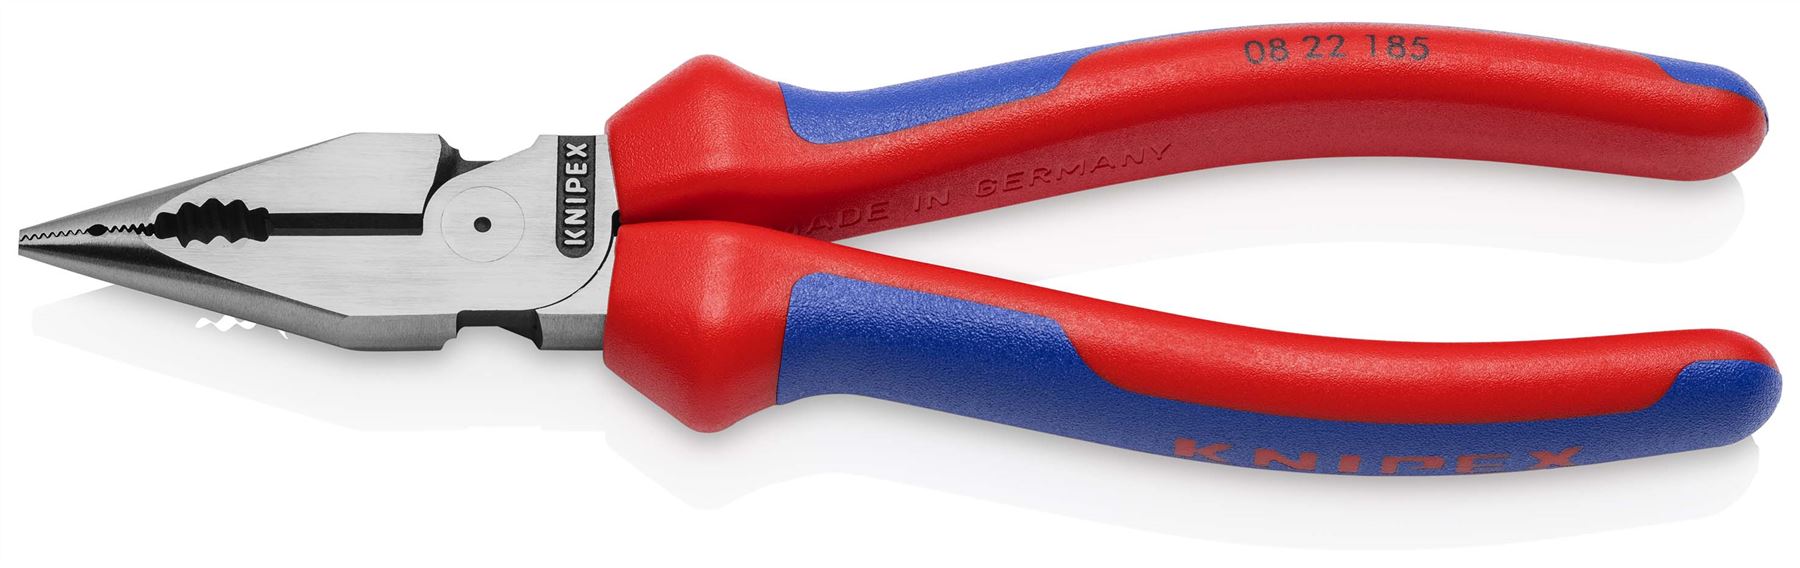 Knipex Needle Nose Combination Pliers 185mm Multi Component Grips 08 22 185